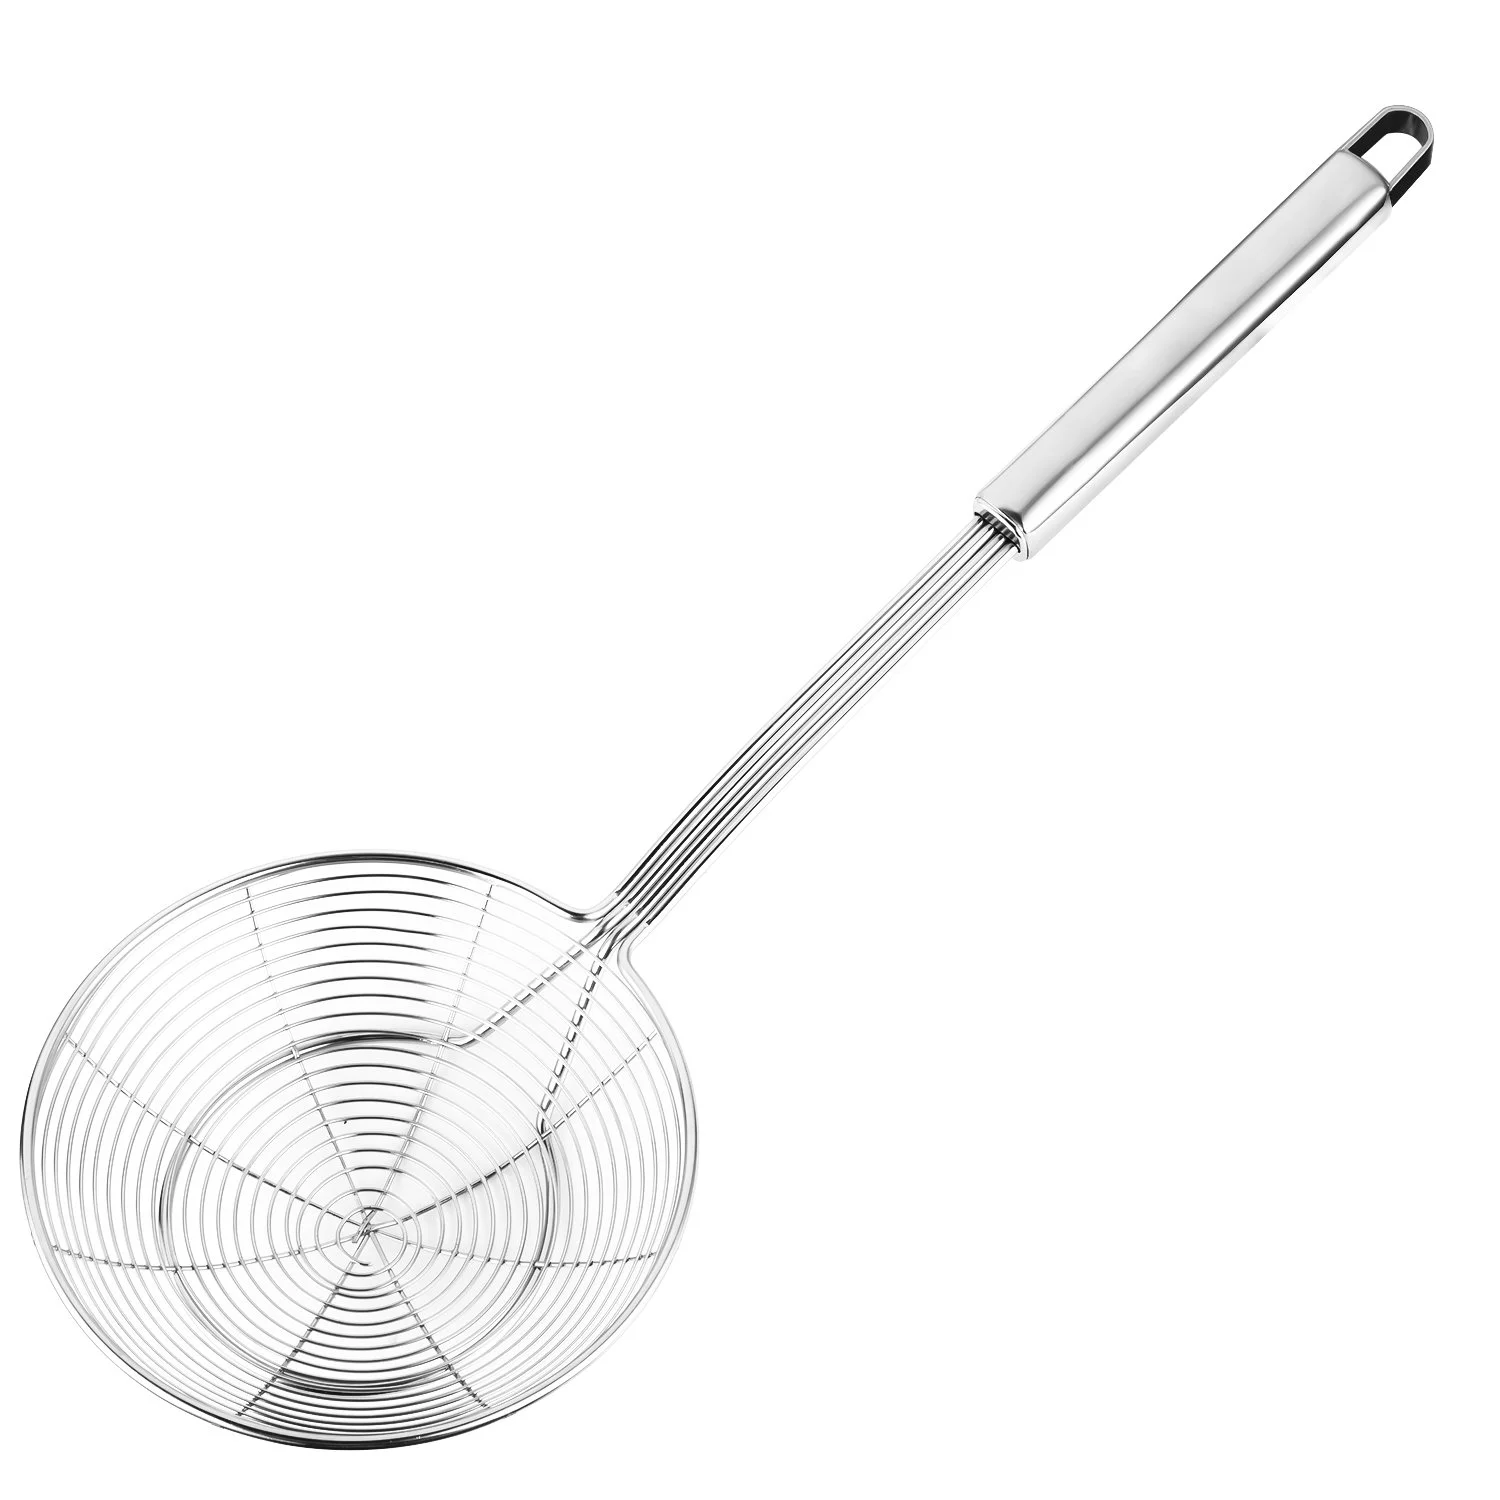 

Solid Stainless Steel Spider Strainer Skimmer Ladle for Cooking and Frying, Kitchen Utensils Wire Strainer Pasta Strainer Spoon